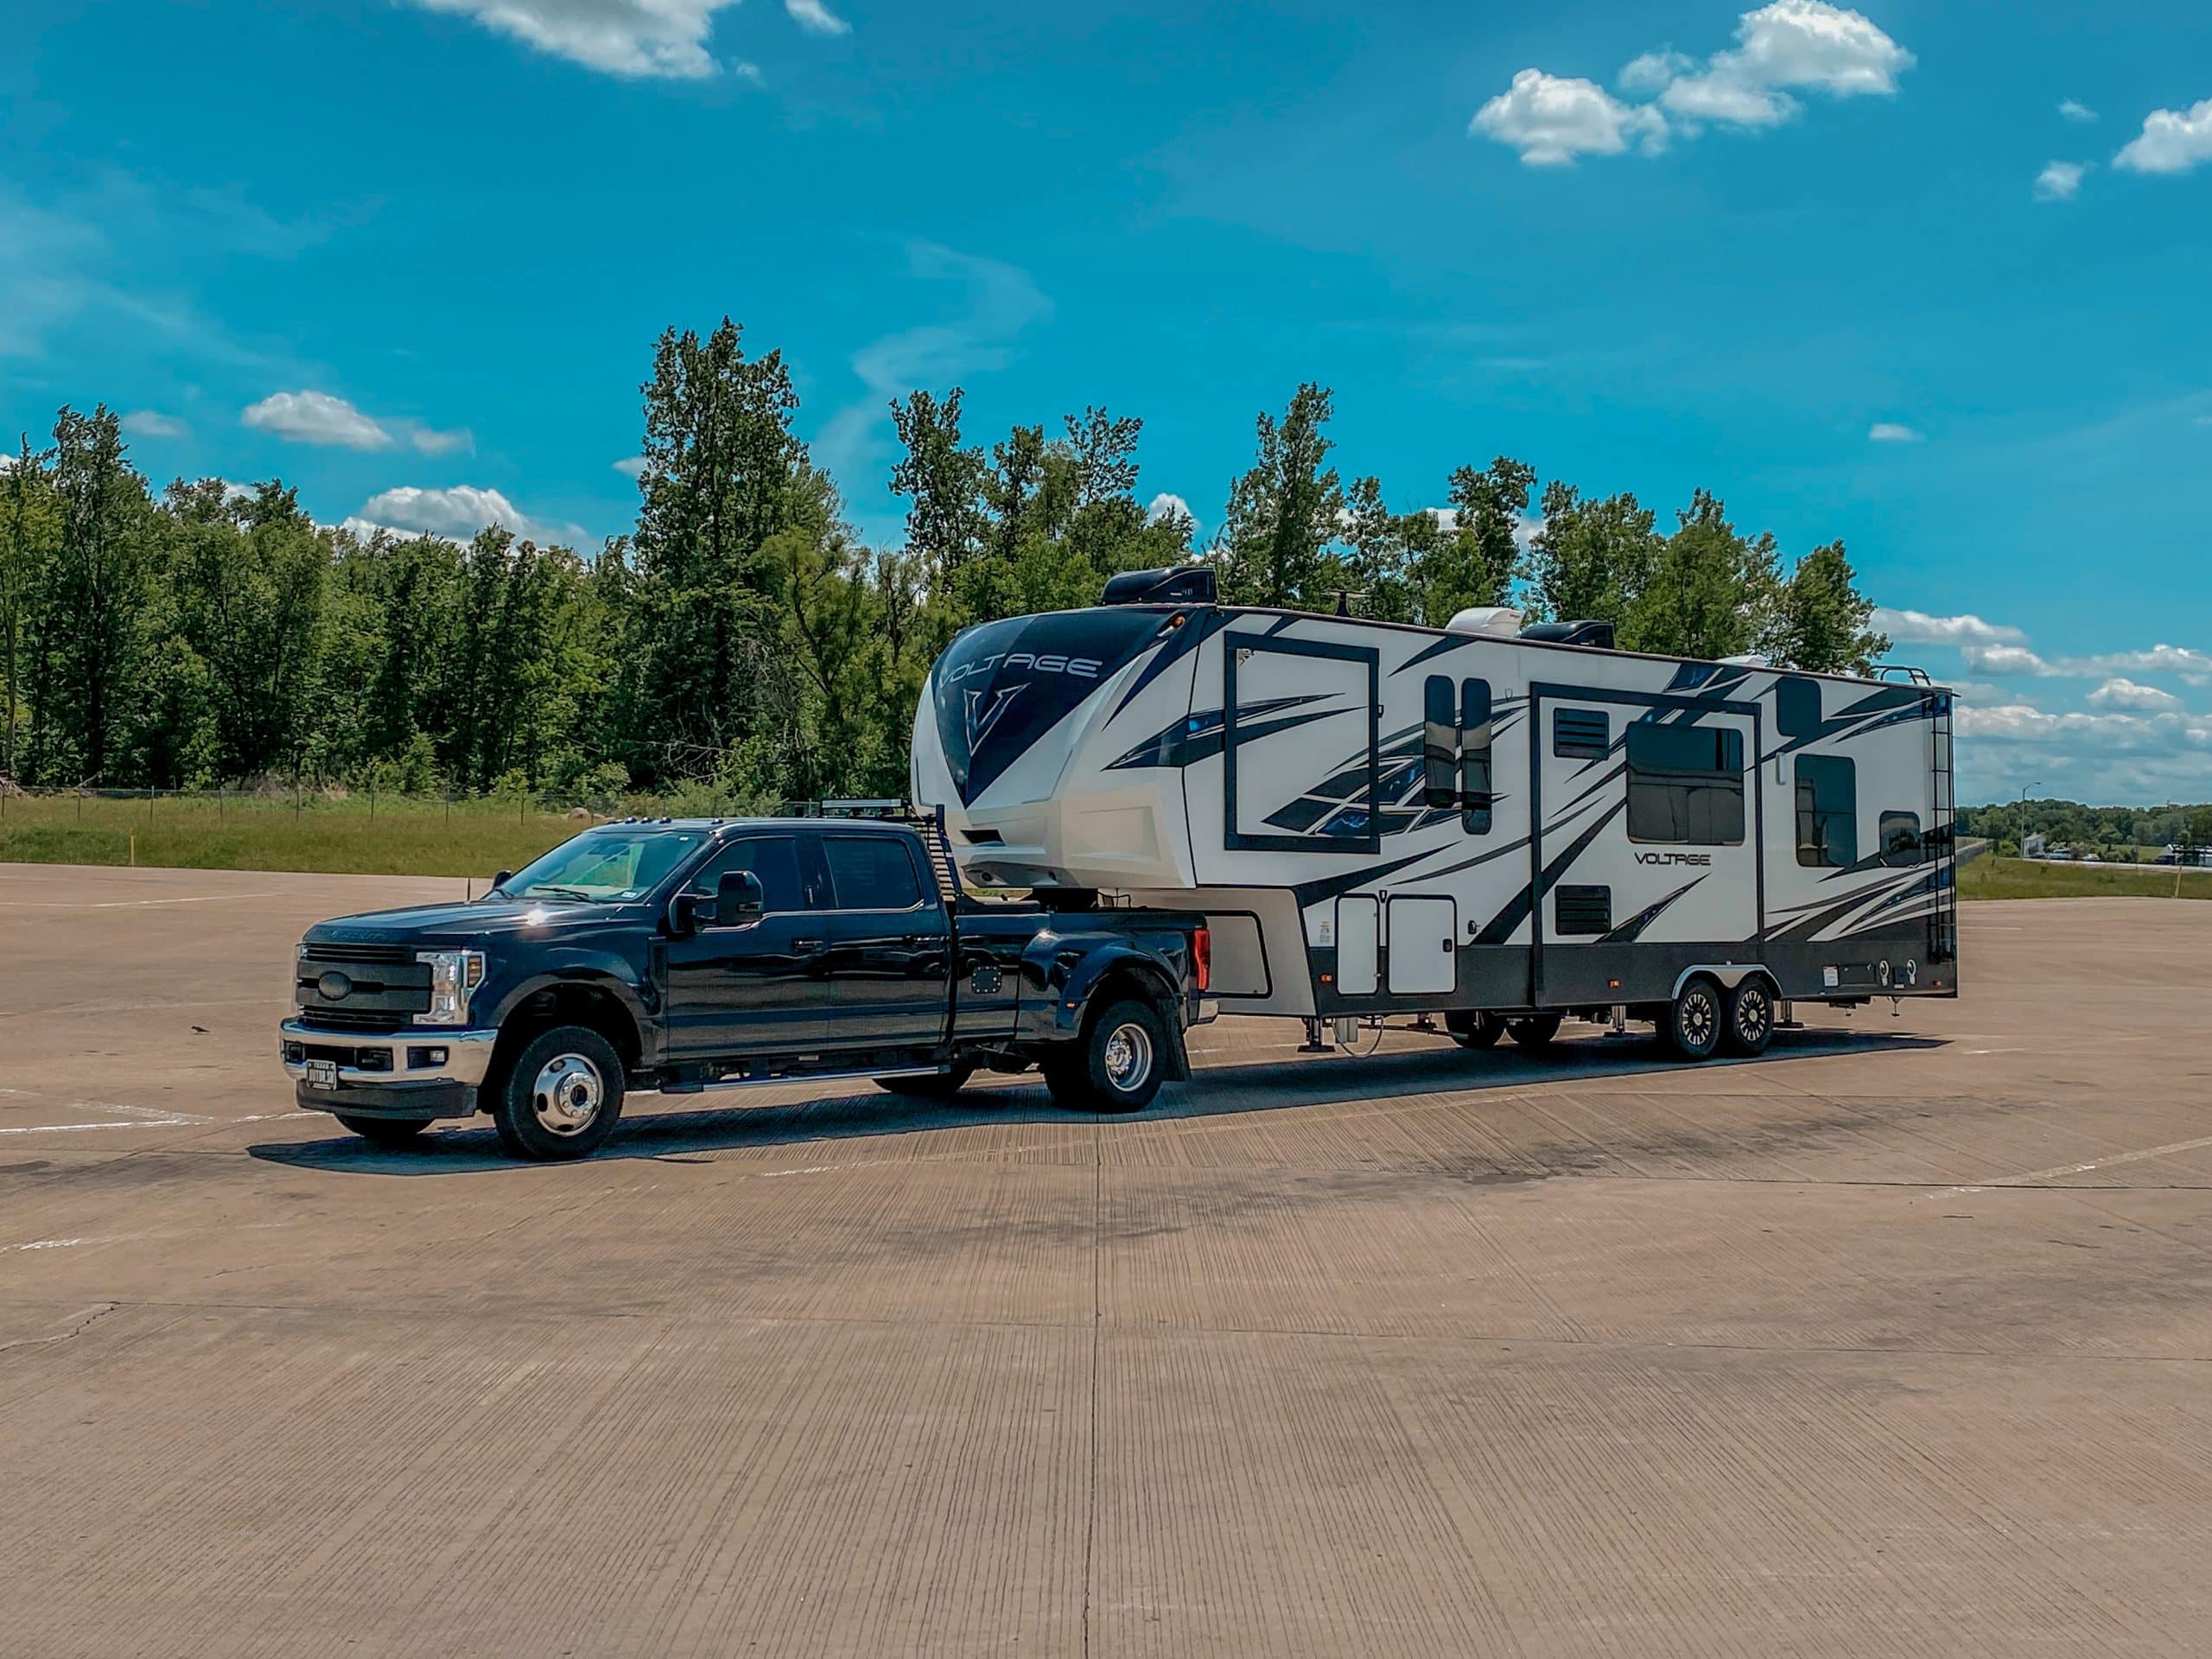 Truck and fifth wheel at rest stop area